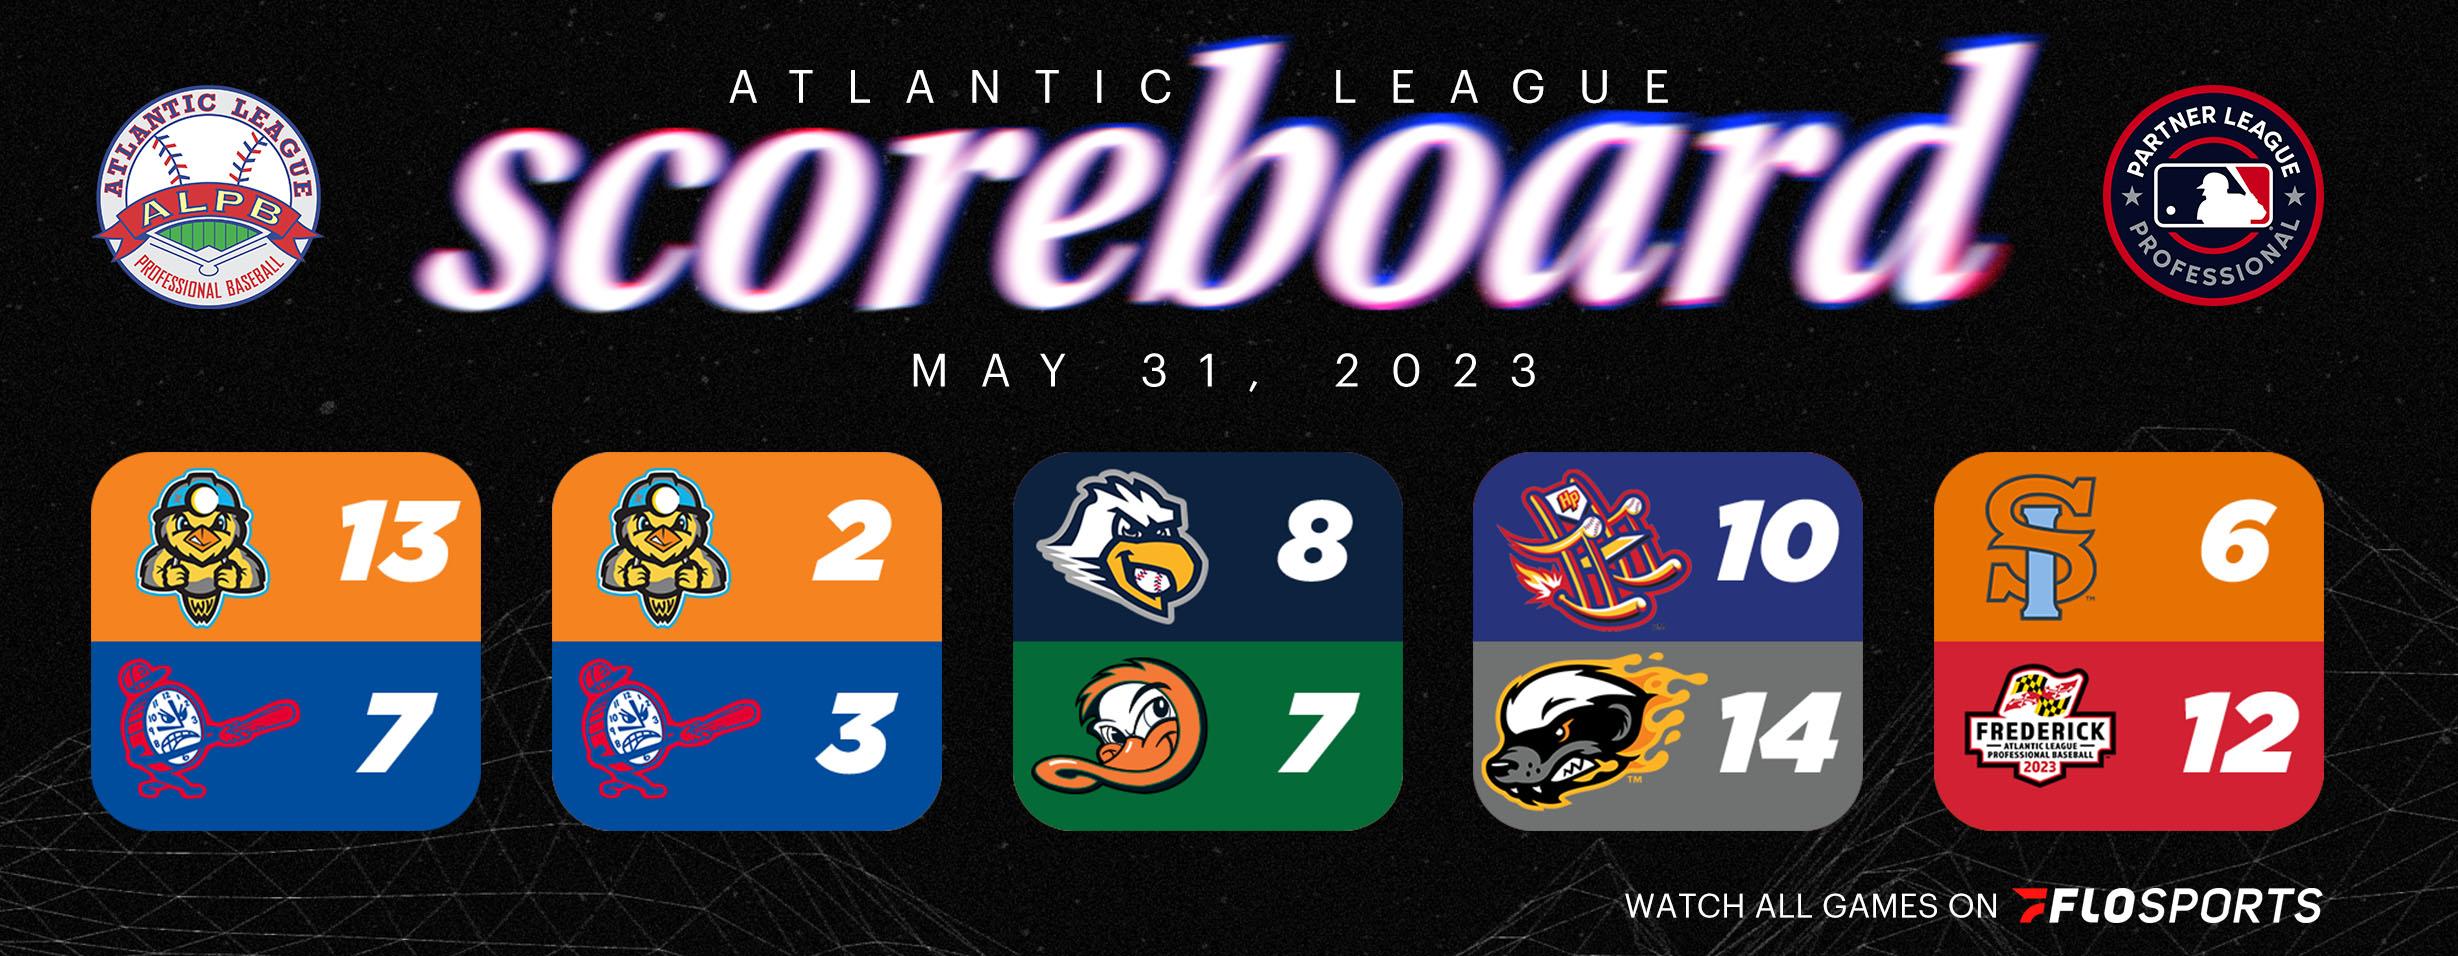 Atlantic League Results, Wednesday, May 31, 2023